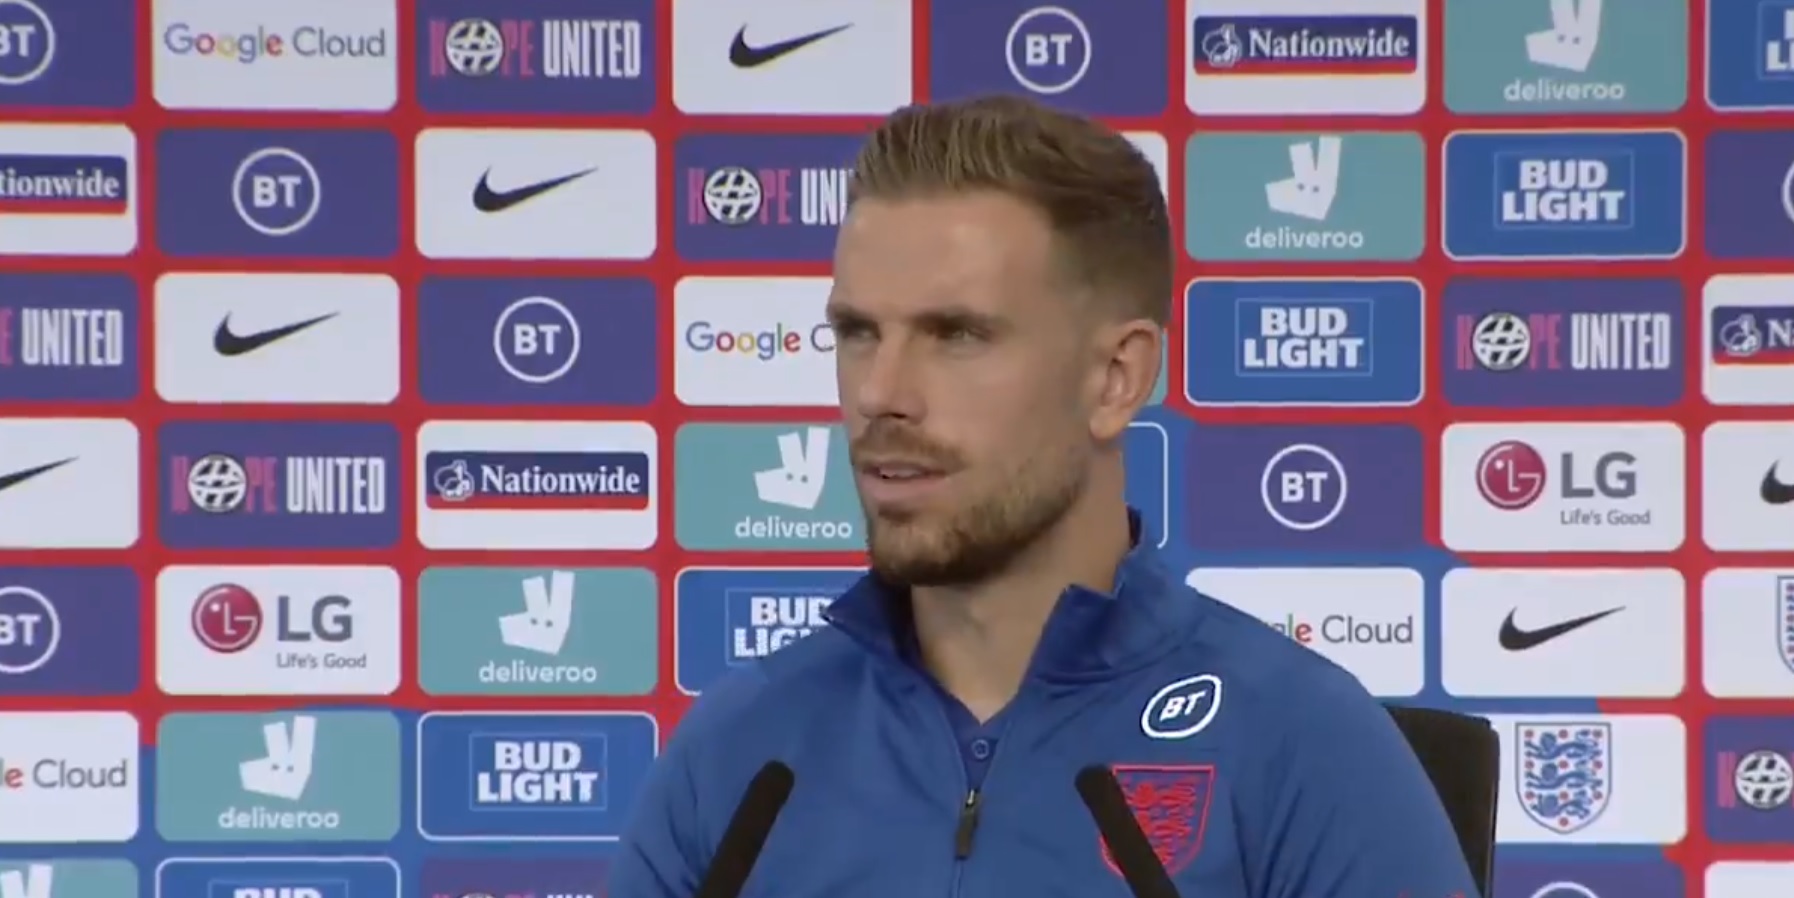 (Video) Jordan Henderson received an interesting message from Klopp ahead of England’s meeting with Germany